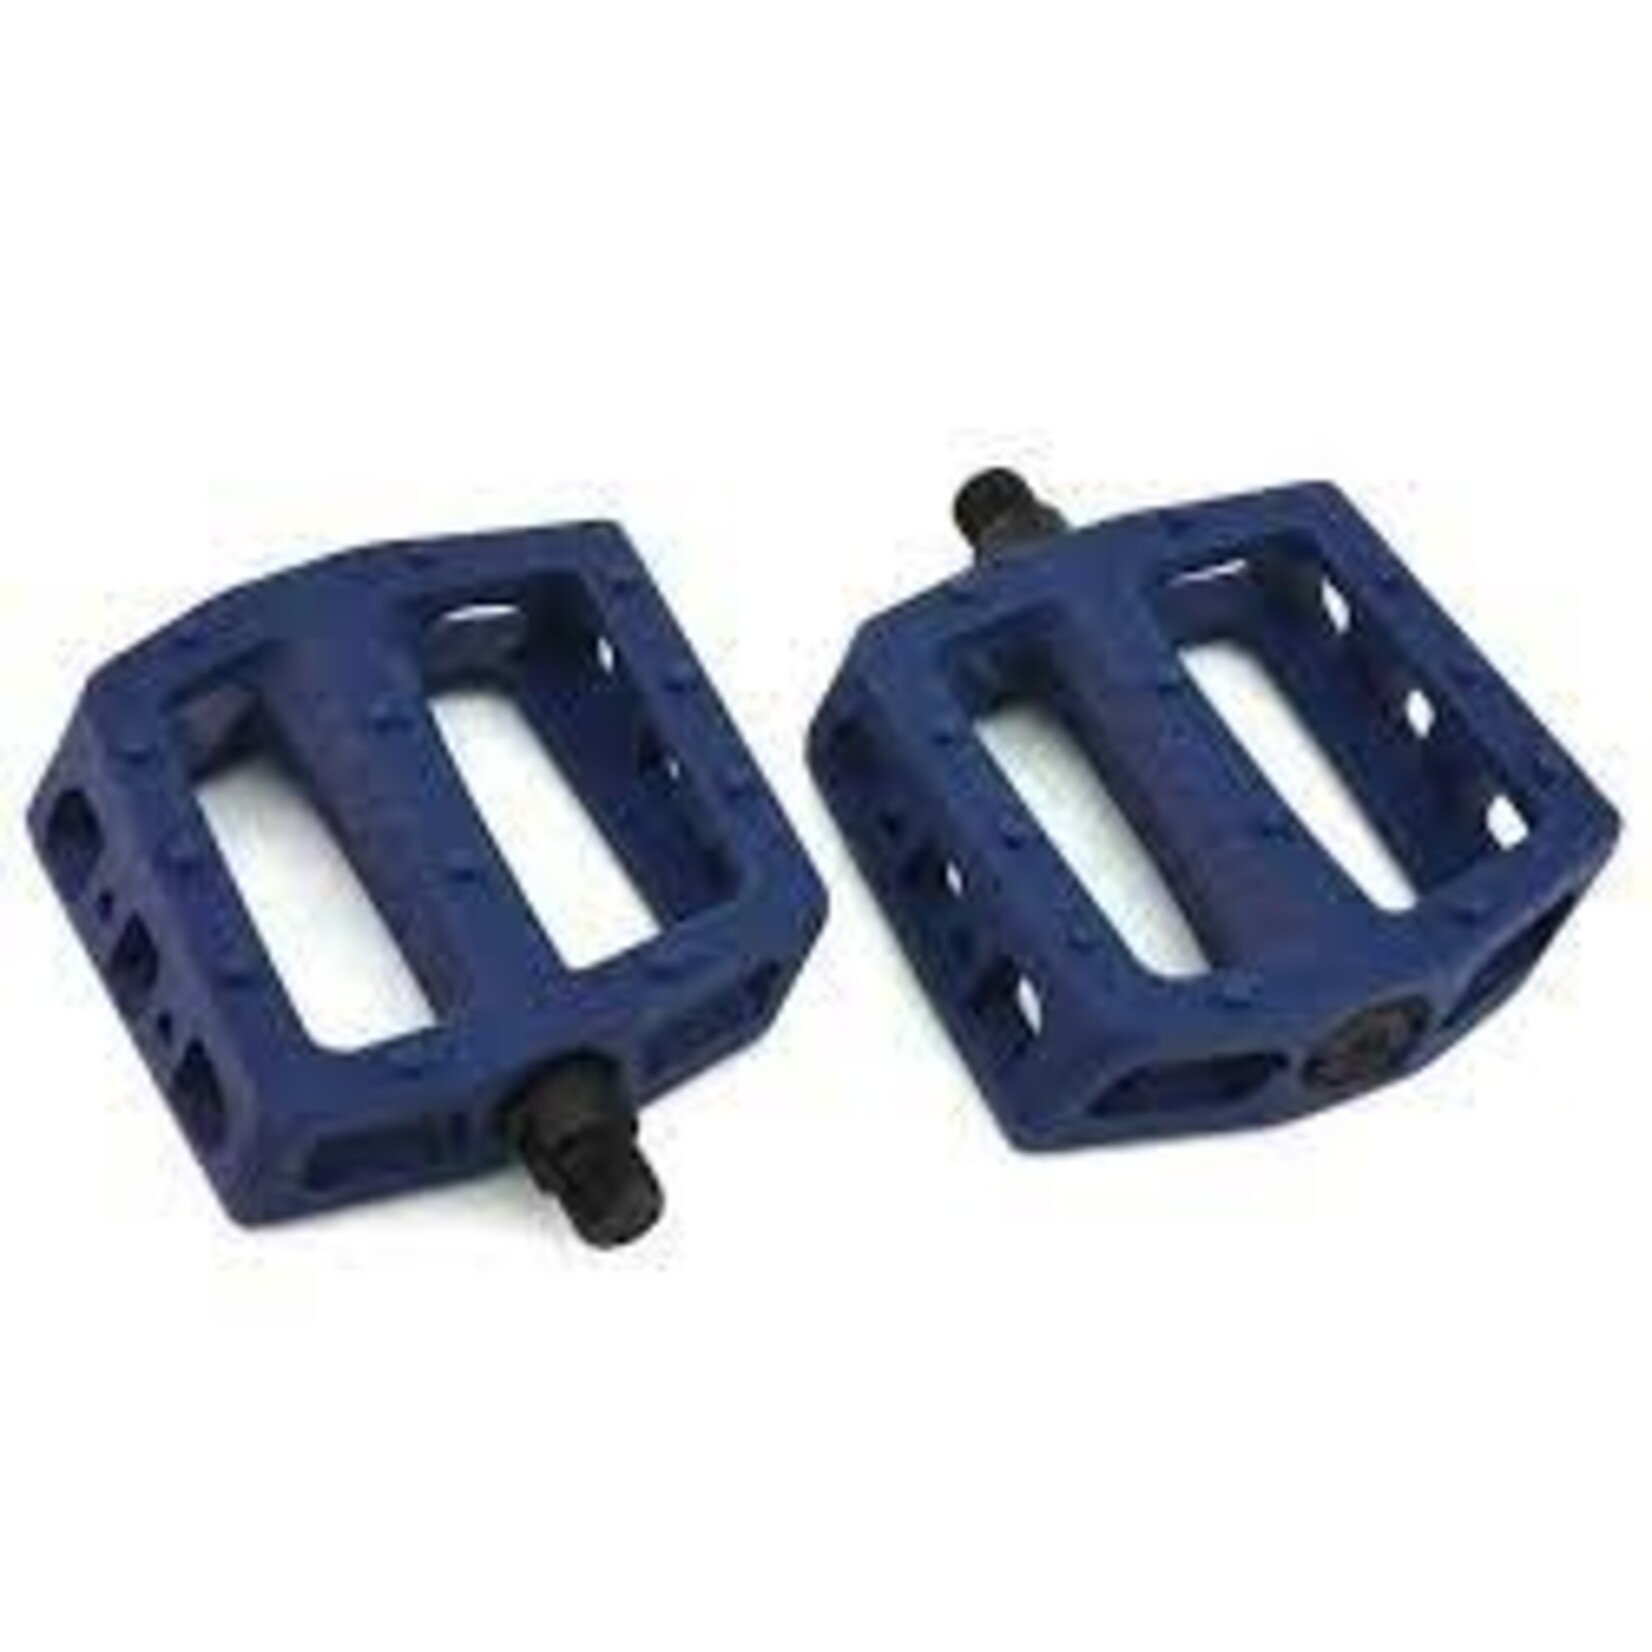 Fitbikeco FITBIKECO Pedals MAC PC 9/16